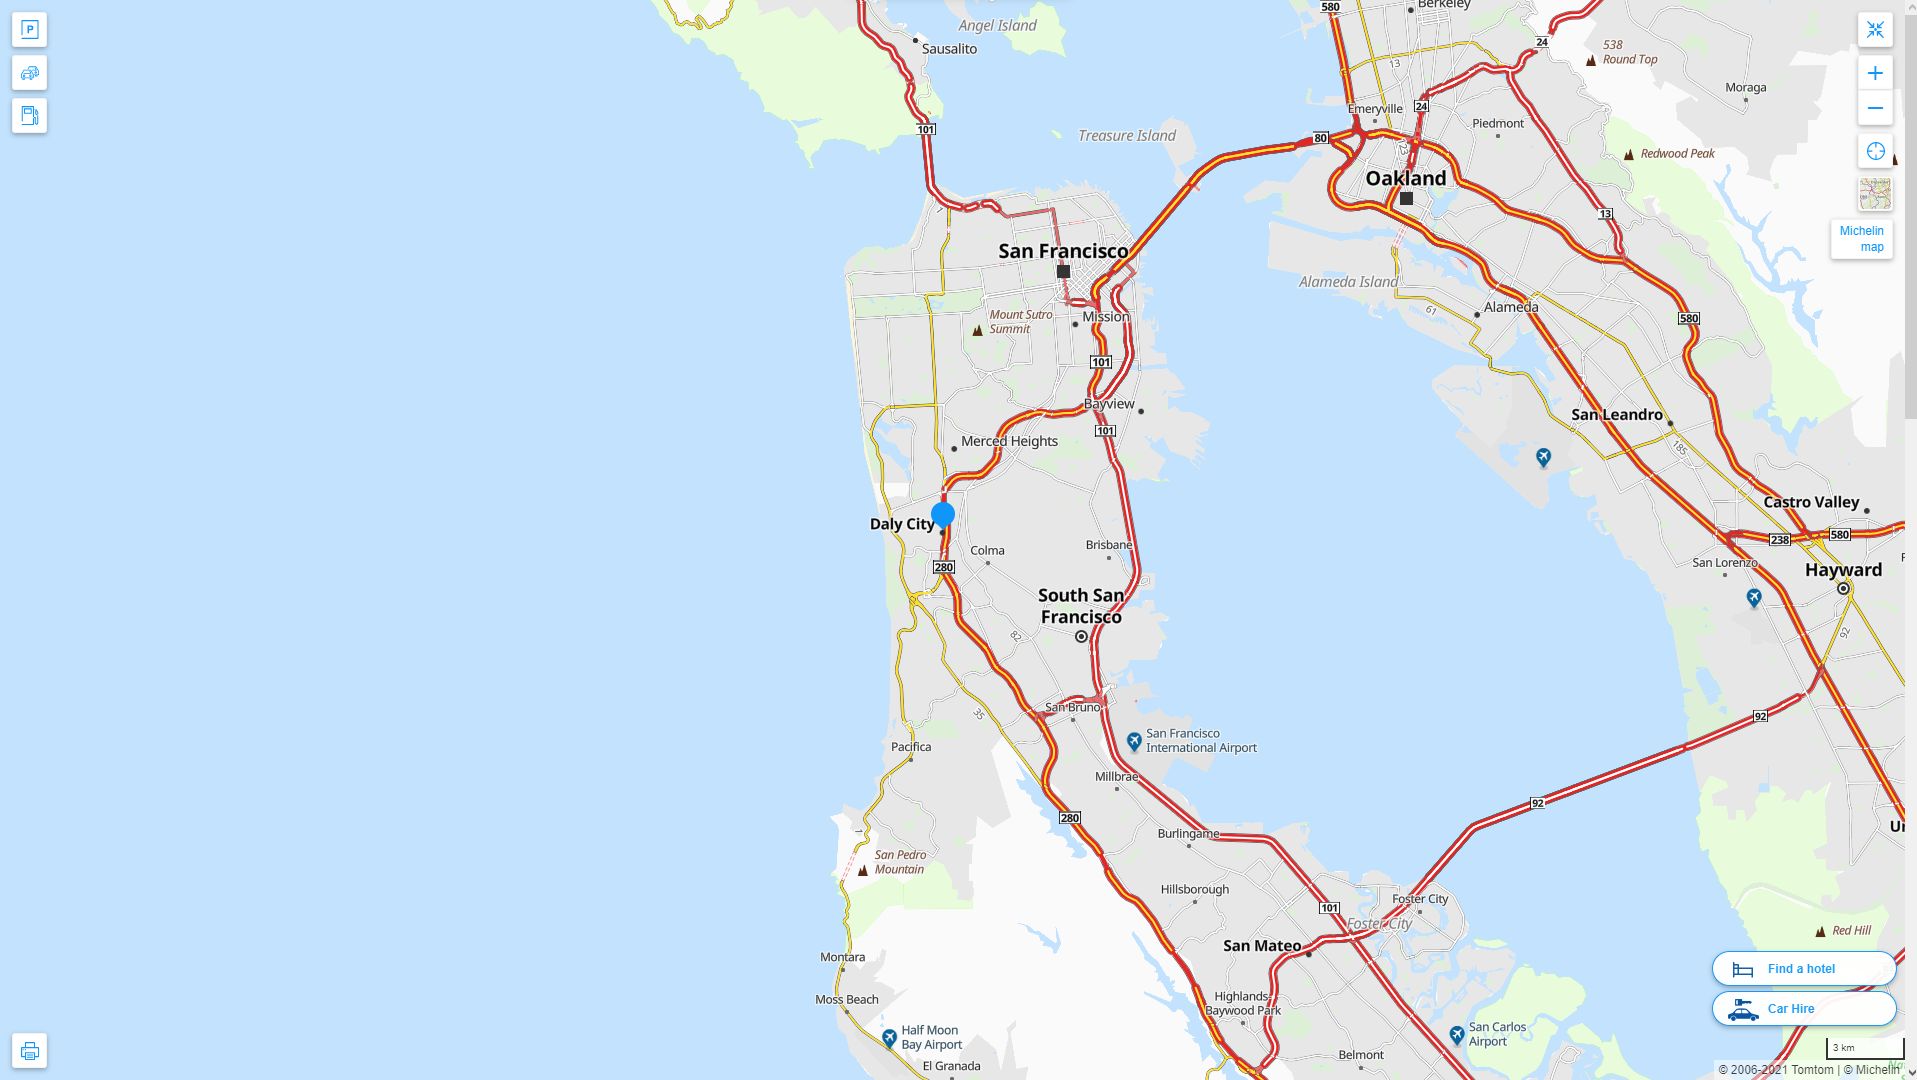 Daly City California Highway and Road Map